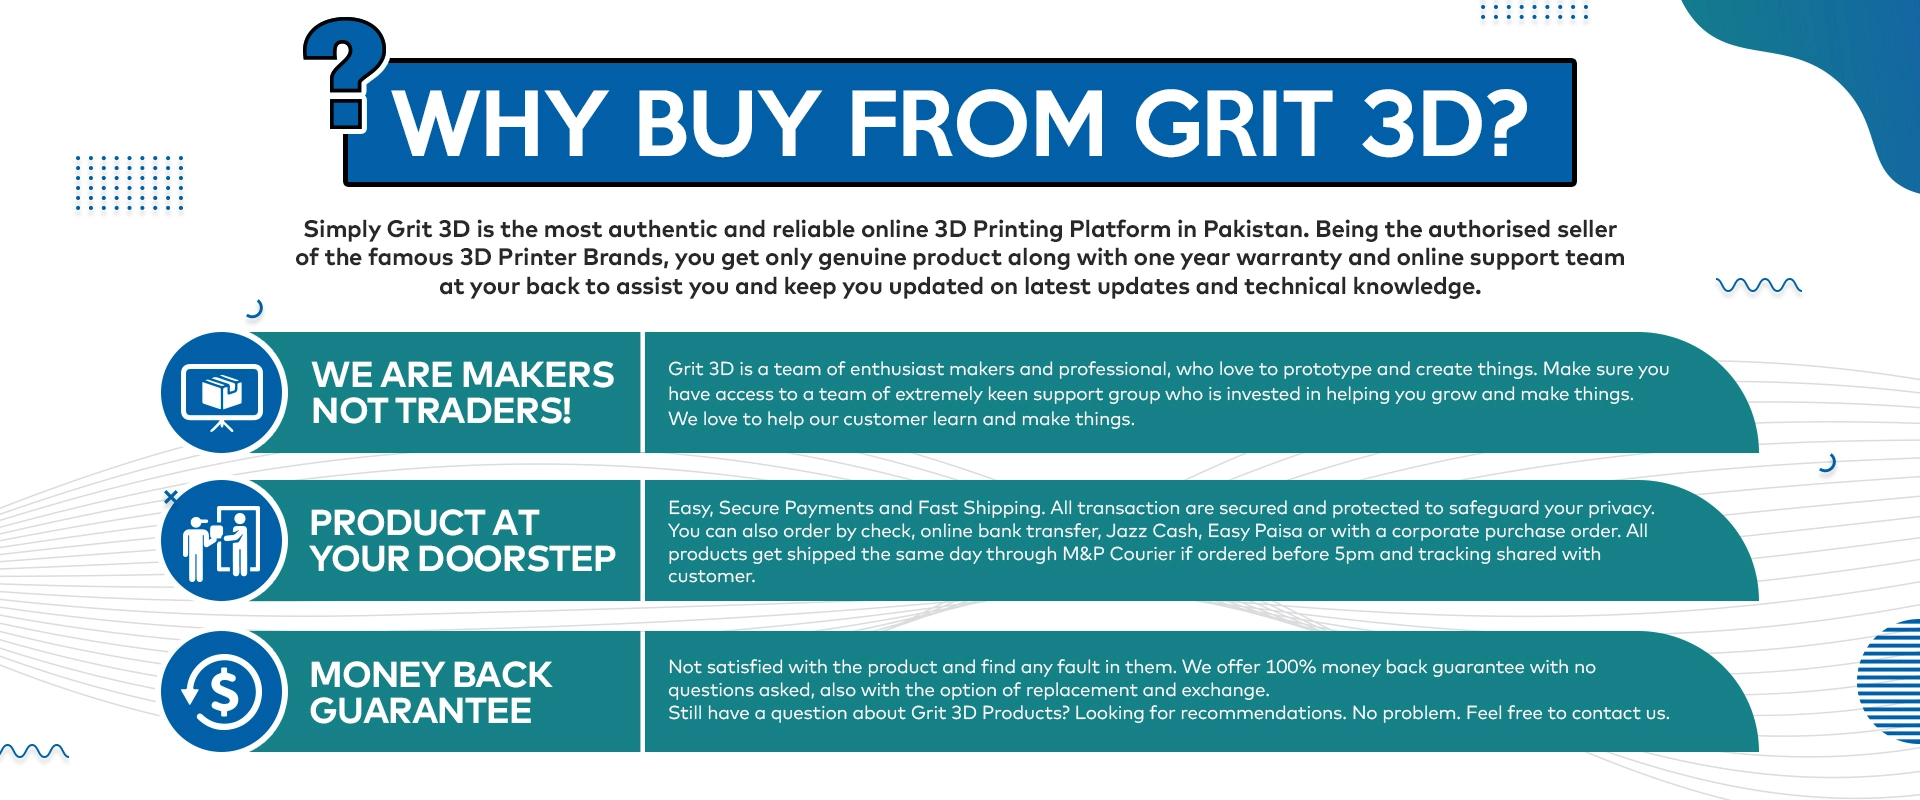 why-buy-from-grti3d